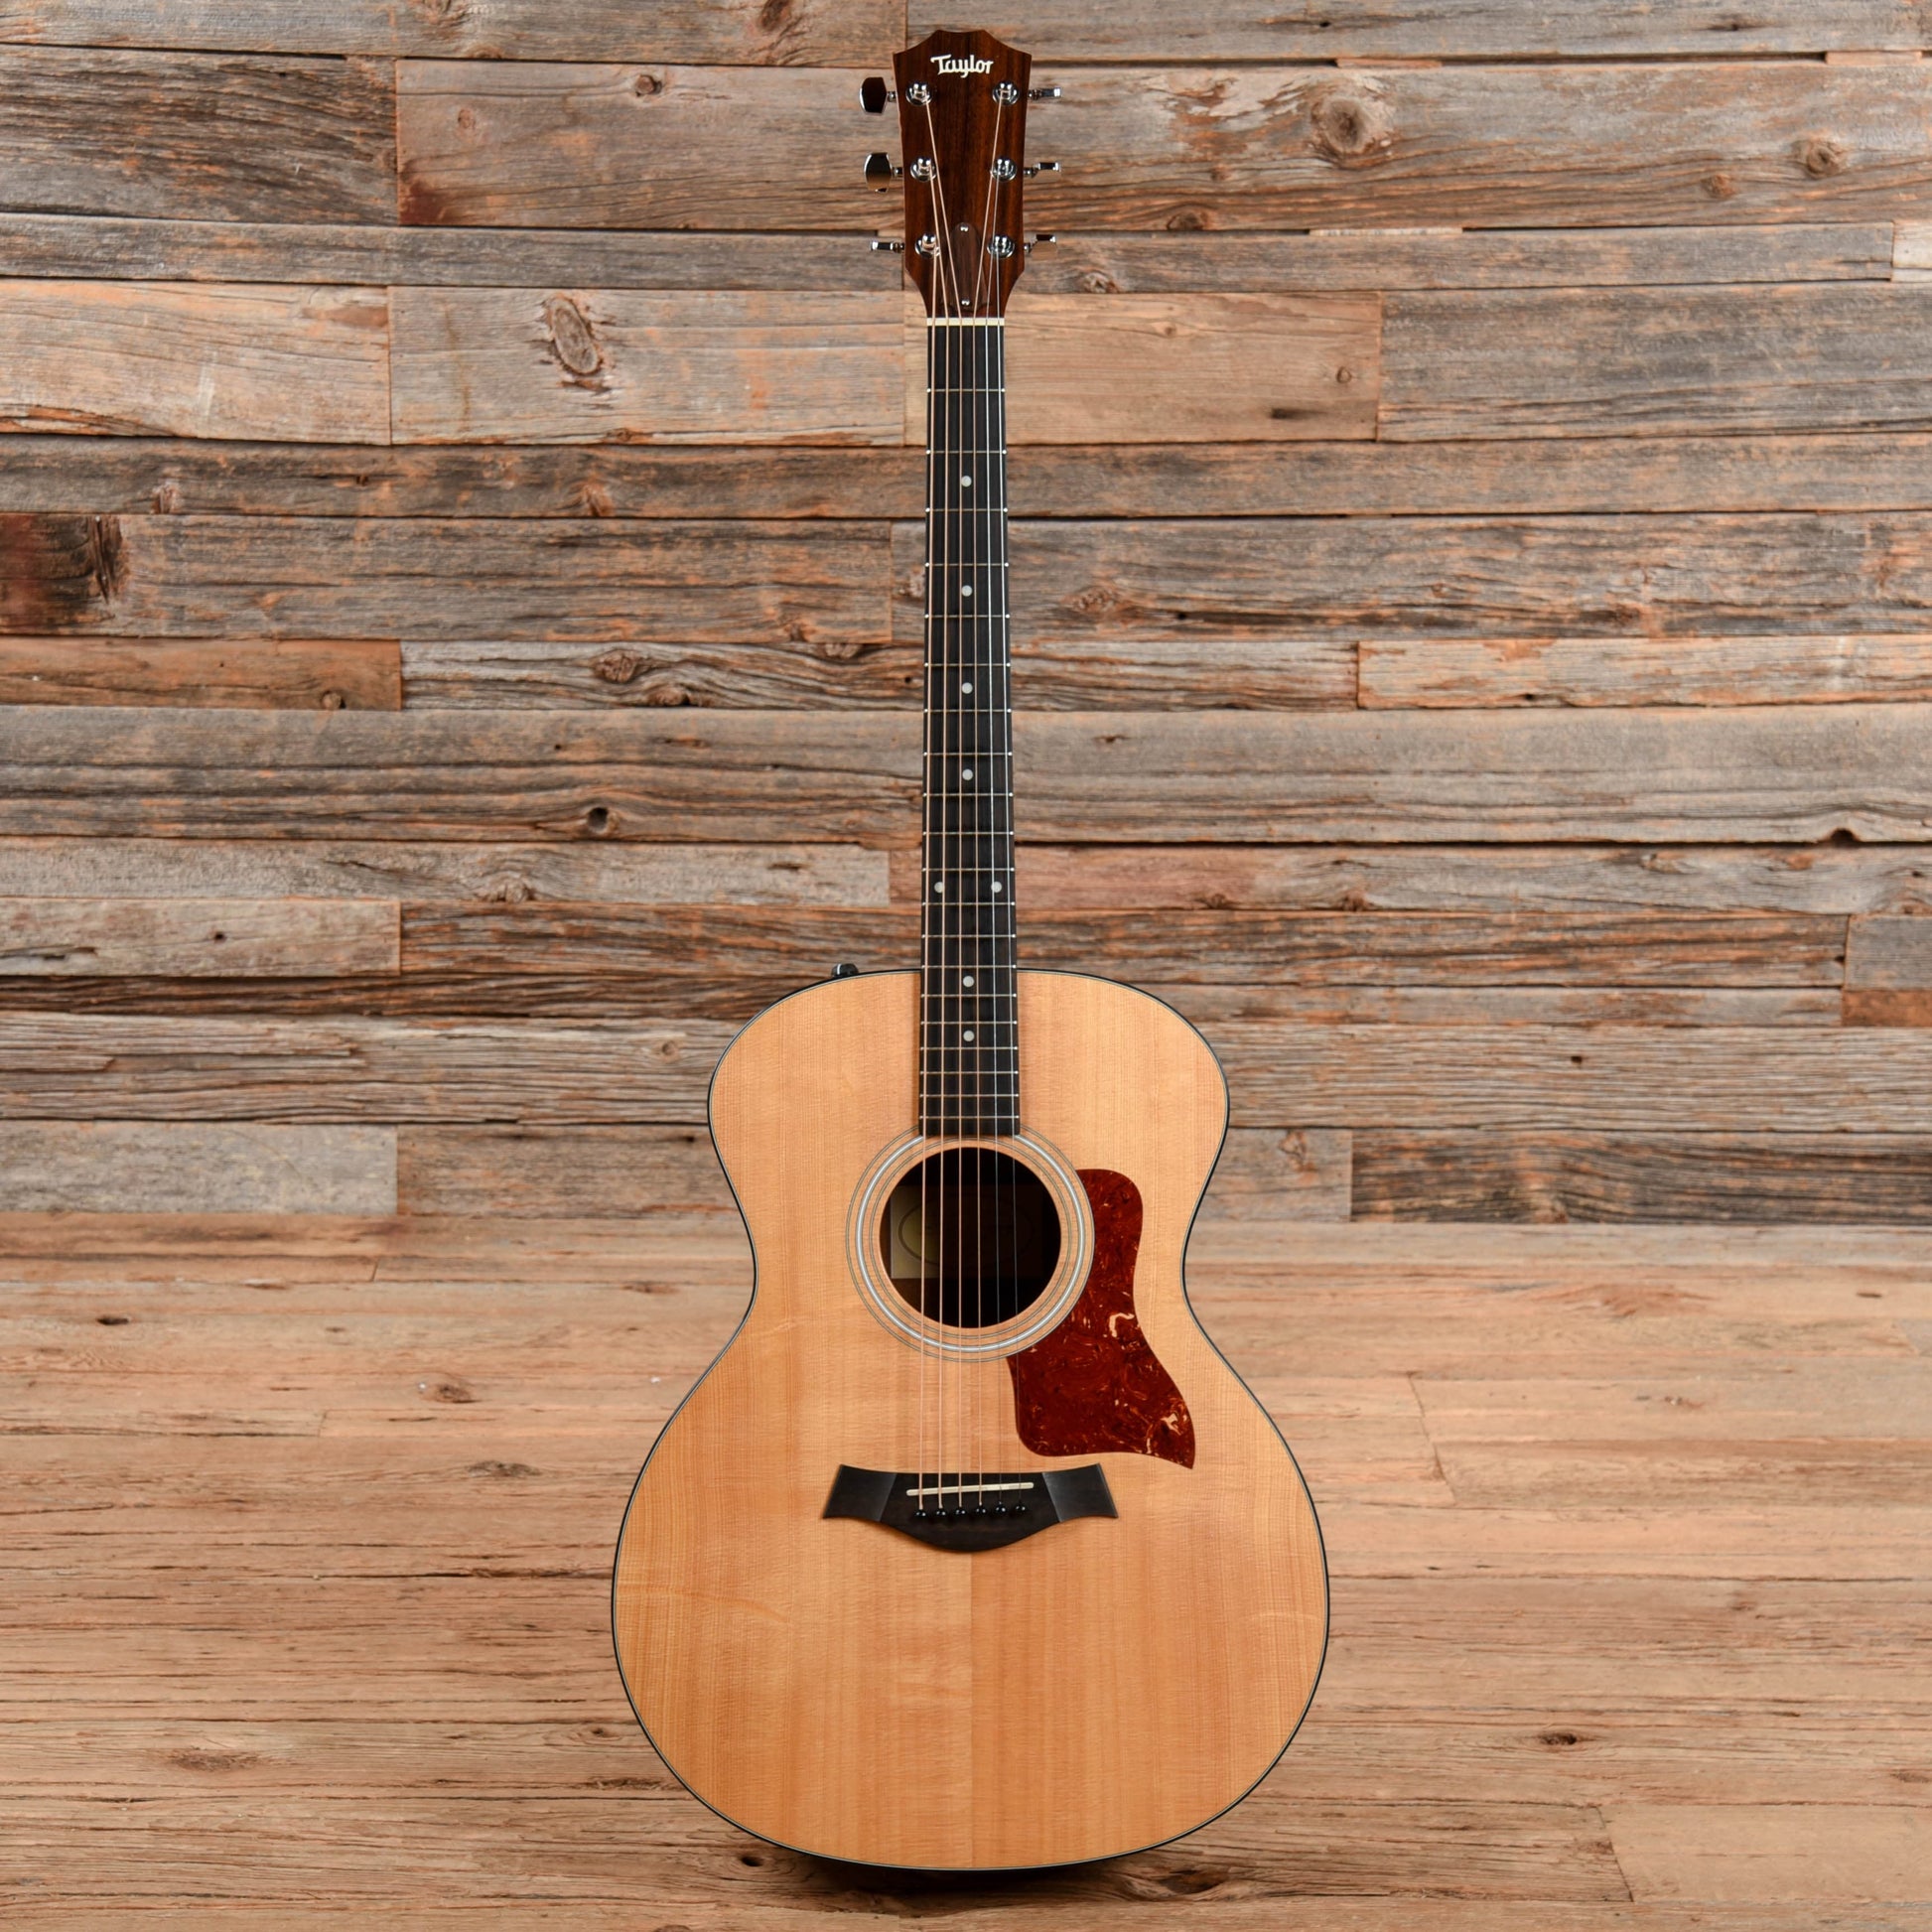 Taylor 114e Natural 2015 Acoustic Guitars / OM and Auditorium